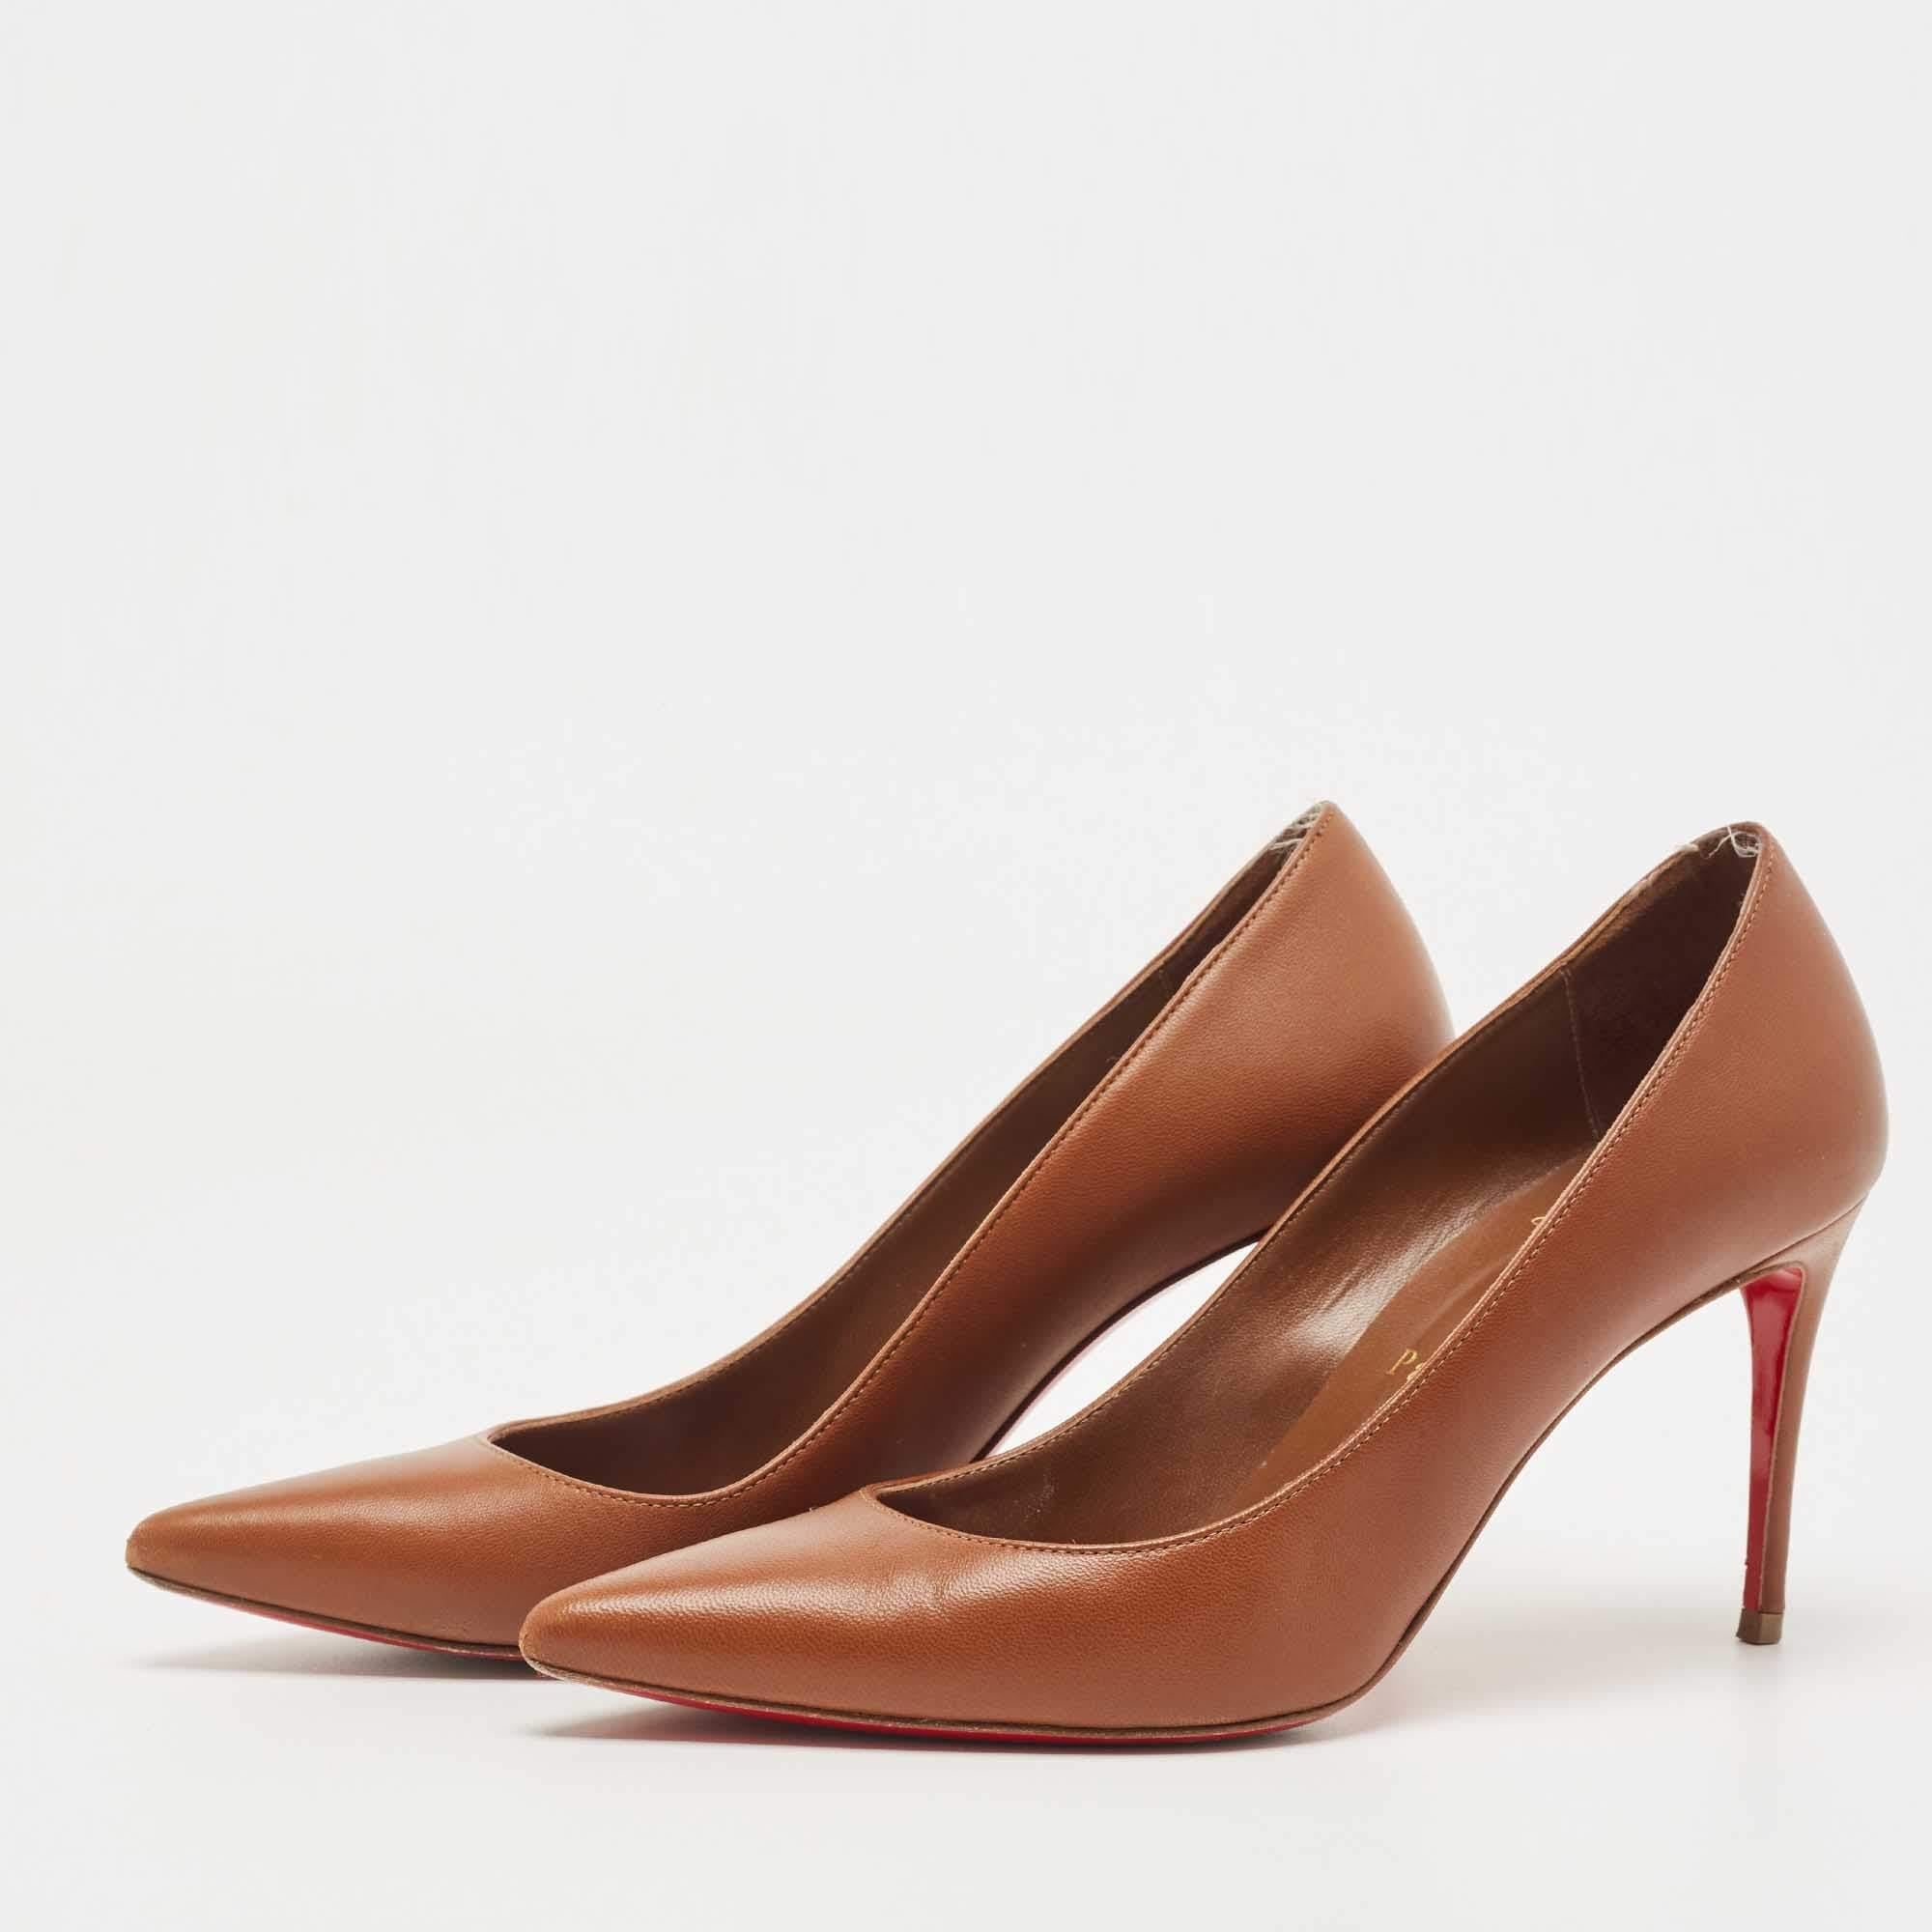 Named after English model Kate Moss, this pair of Christian Louboutin Kate pumps reflects elegance and sophistication in every step. Proving the brand's expertise in the art of stiletto making, it has been diligently crafted from leather on the